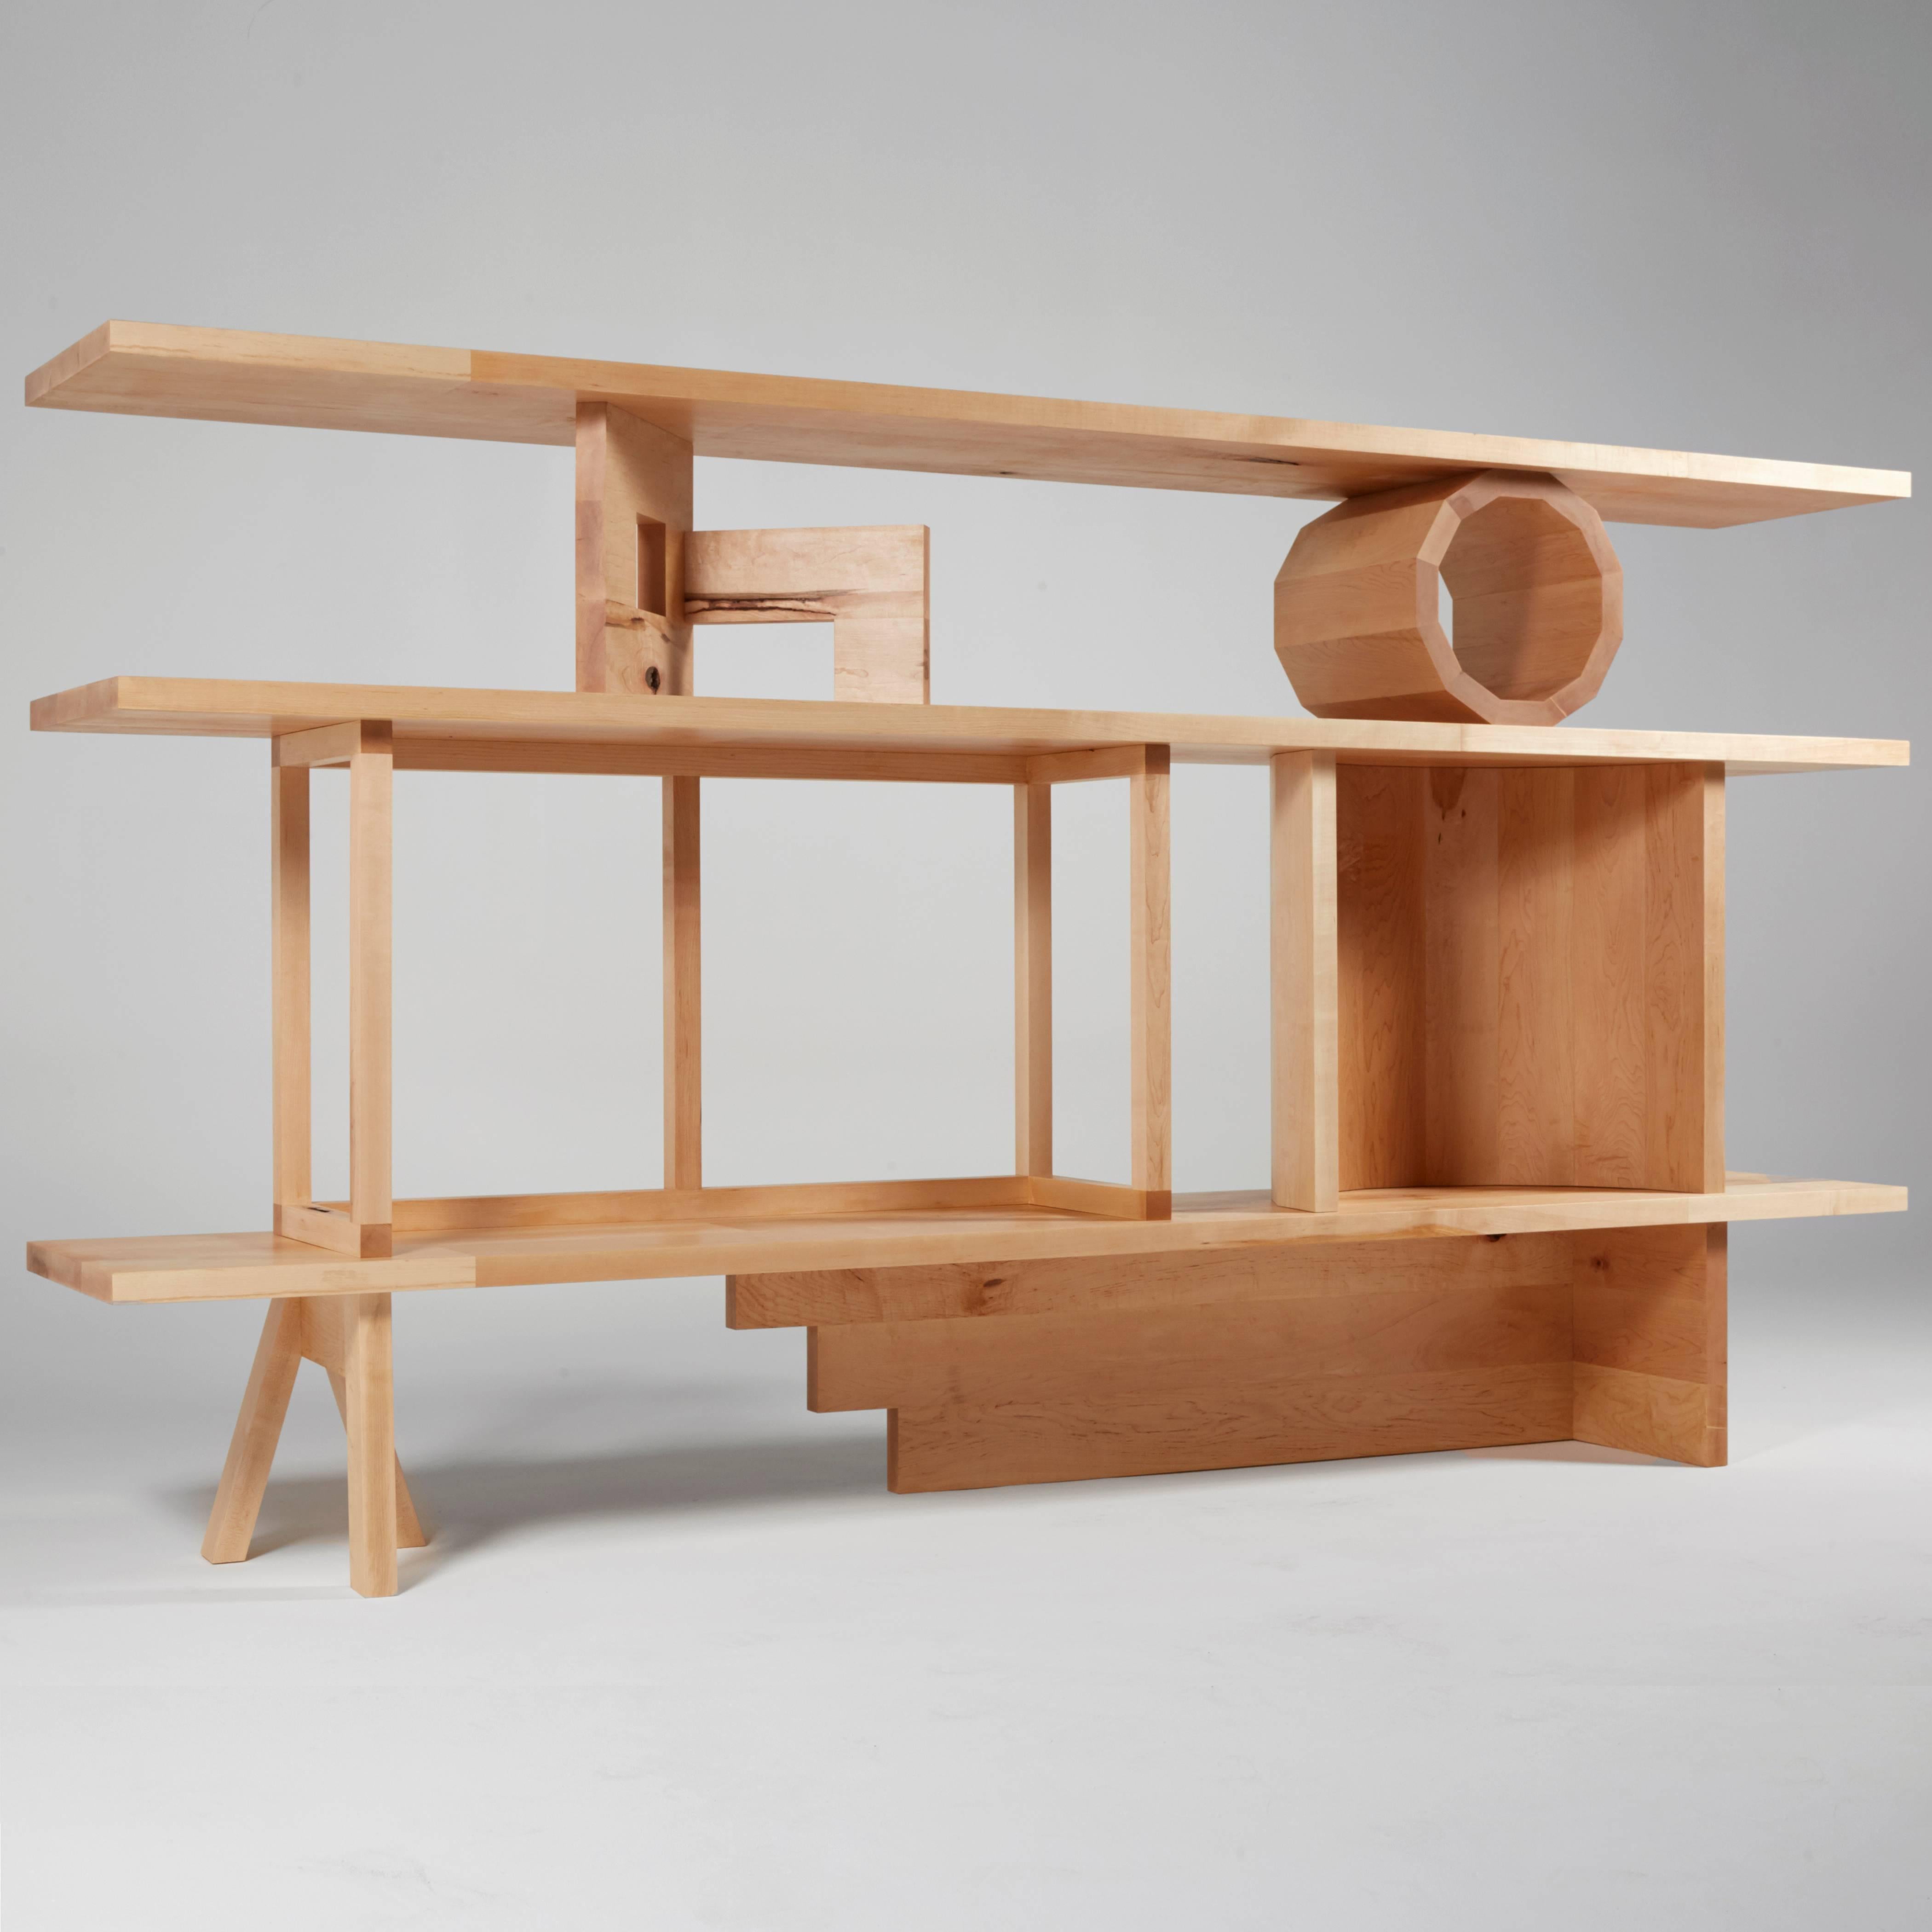 Stack Shelving Unit is a grouping of architectural and abstract sculptures by Noah Spencer that together make a shelving unit. When these sculptures are moved around and used in different positions to hold up shelving planks, they create multiple